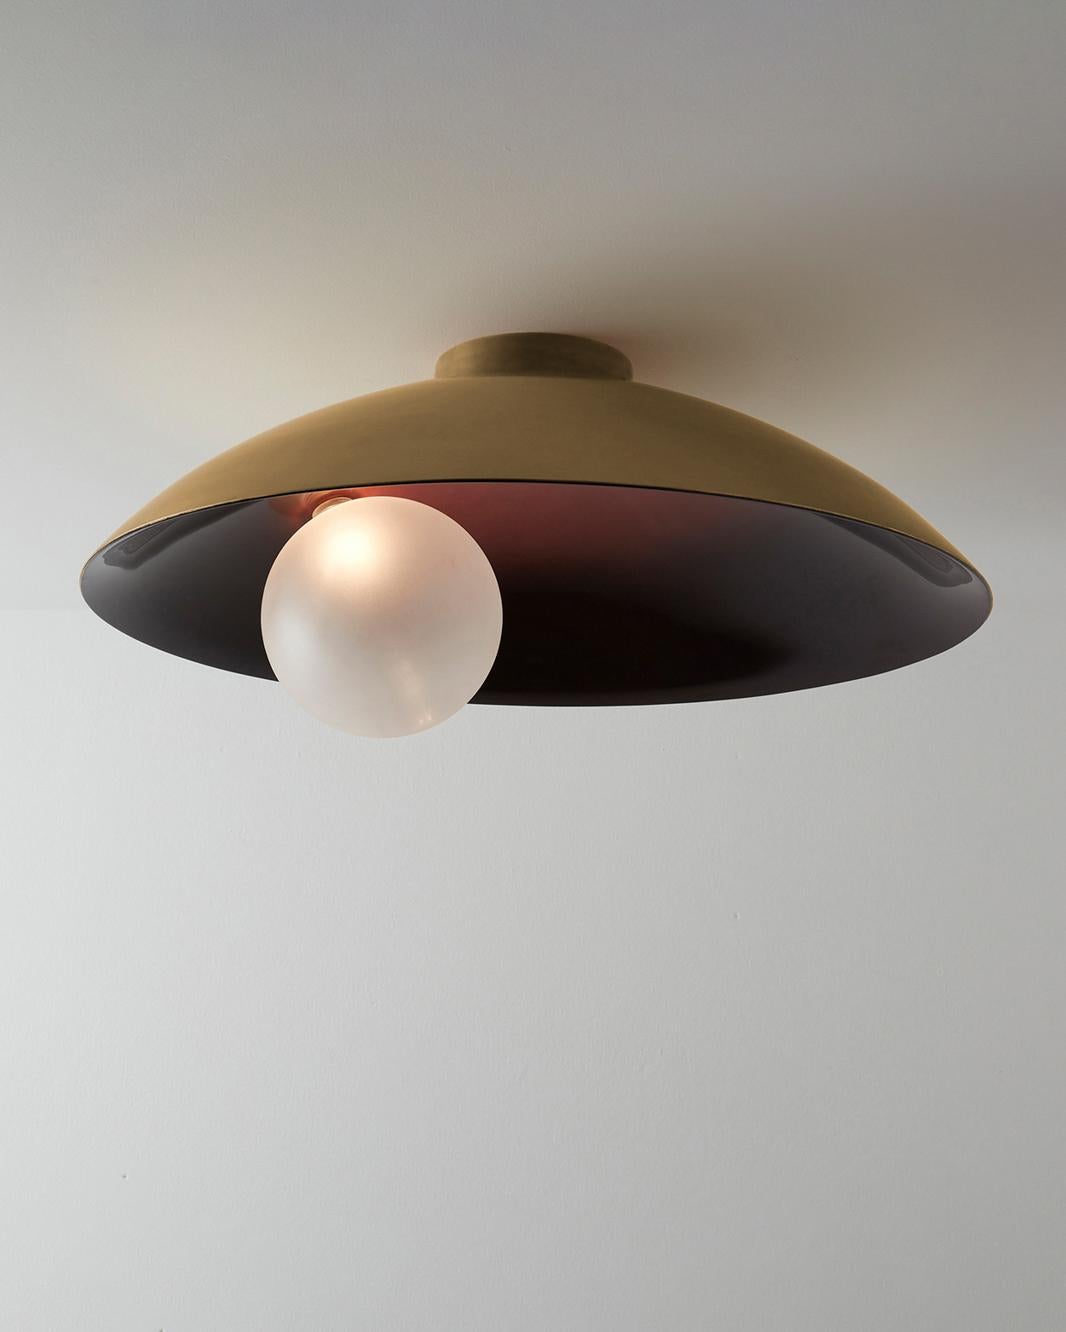 Oyster Burgundy and Brushed Brass Ceiling Mounted Lamp by Carla Baz
Dimensions: Ø 70 x H 26 cm.
Materials: Brushed brass.
Weight: 9 kg.

Available in brushed brass, copper or bronze finishes. Available in different color options. Please contact us.